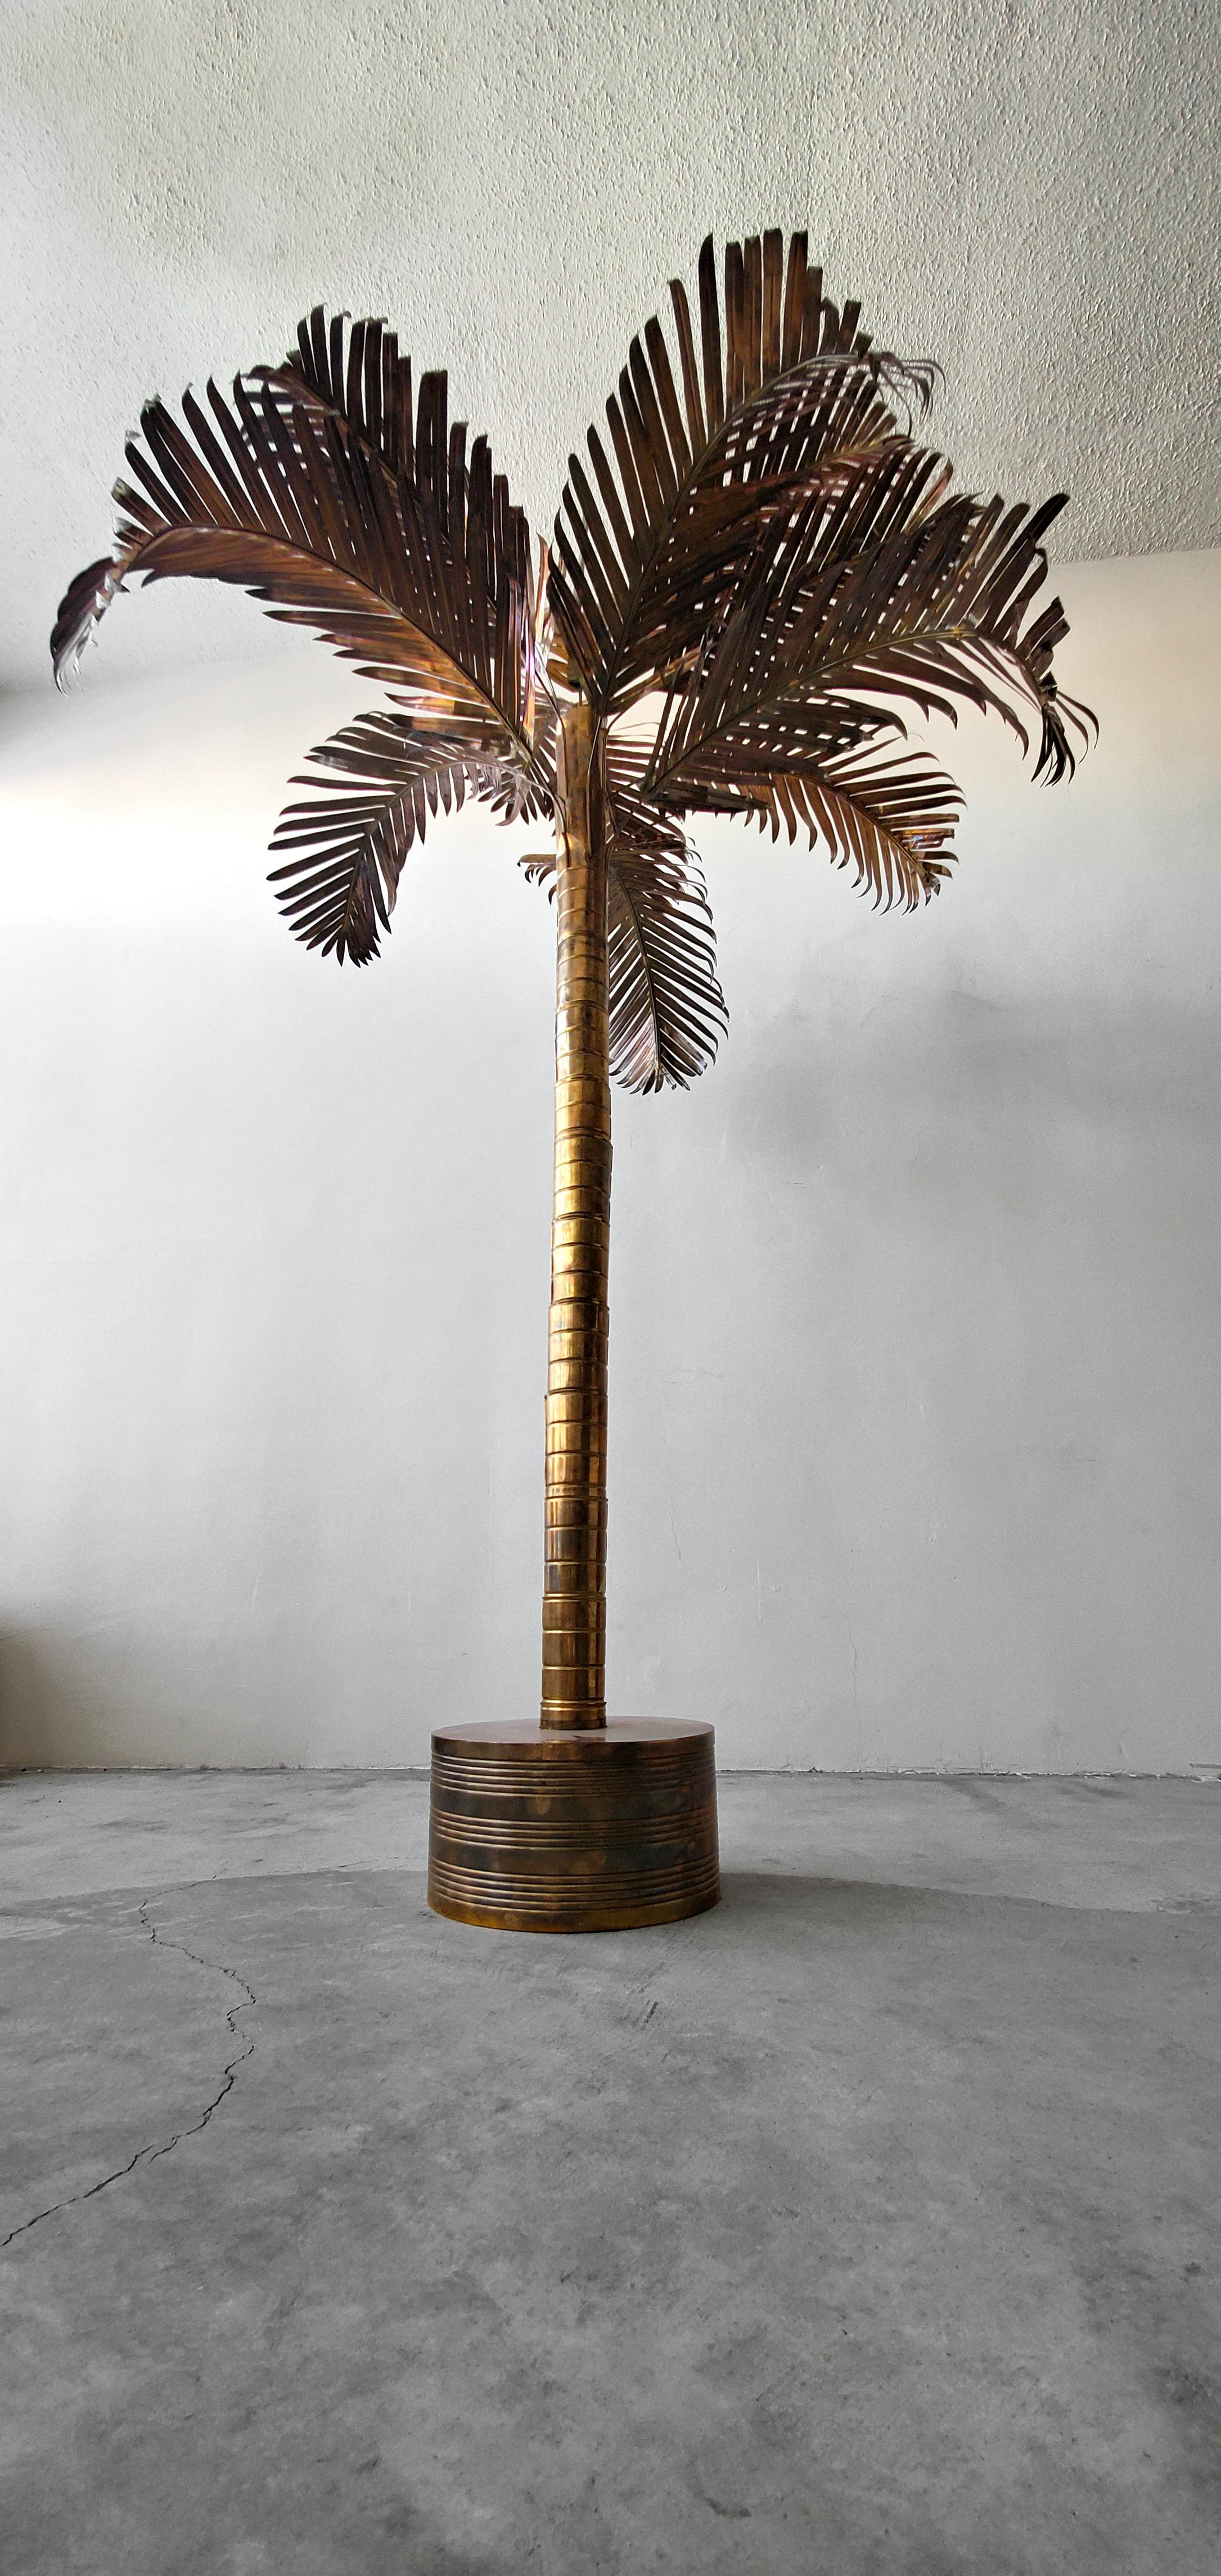 Gorgeous Regency style, vintage brass palm tree. Beautiful, varying degrees of patina, adding contrast and interest. This tree is large, measuring over 8ft, perfect size to be used as a retail fixture or in a home with high ceilings.

Tree is in